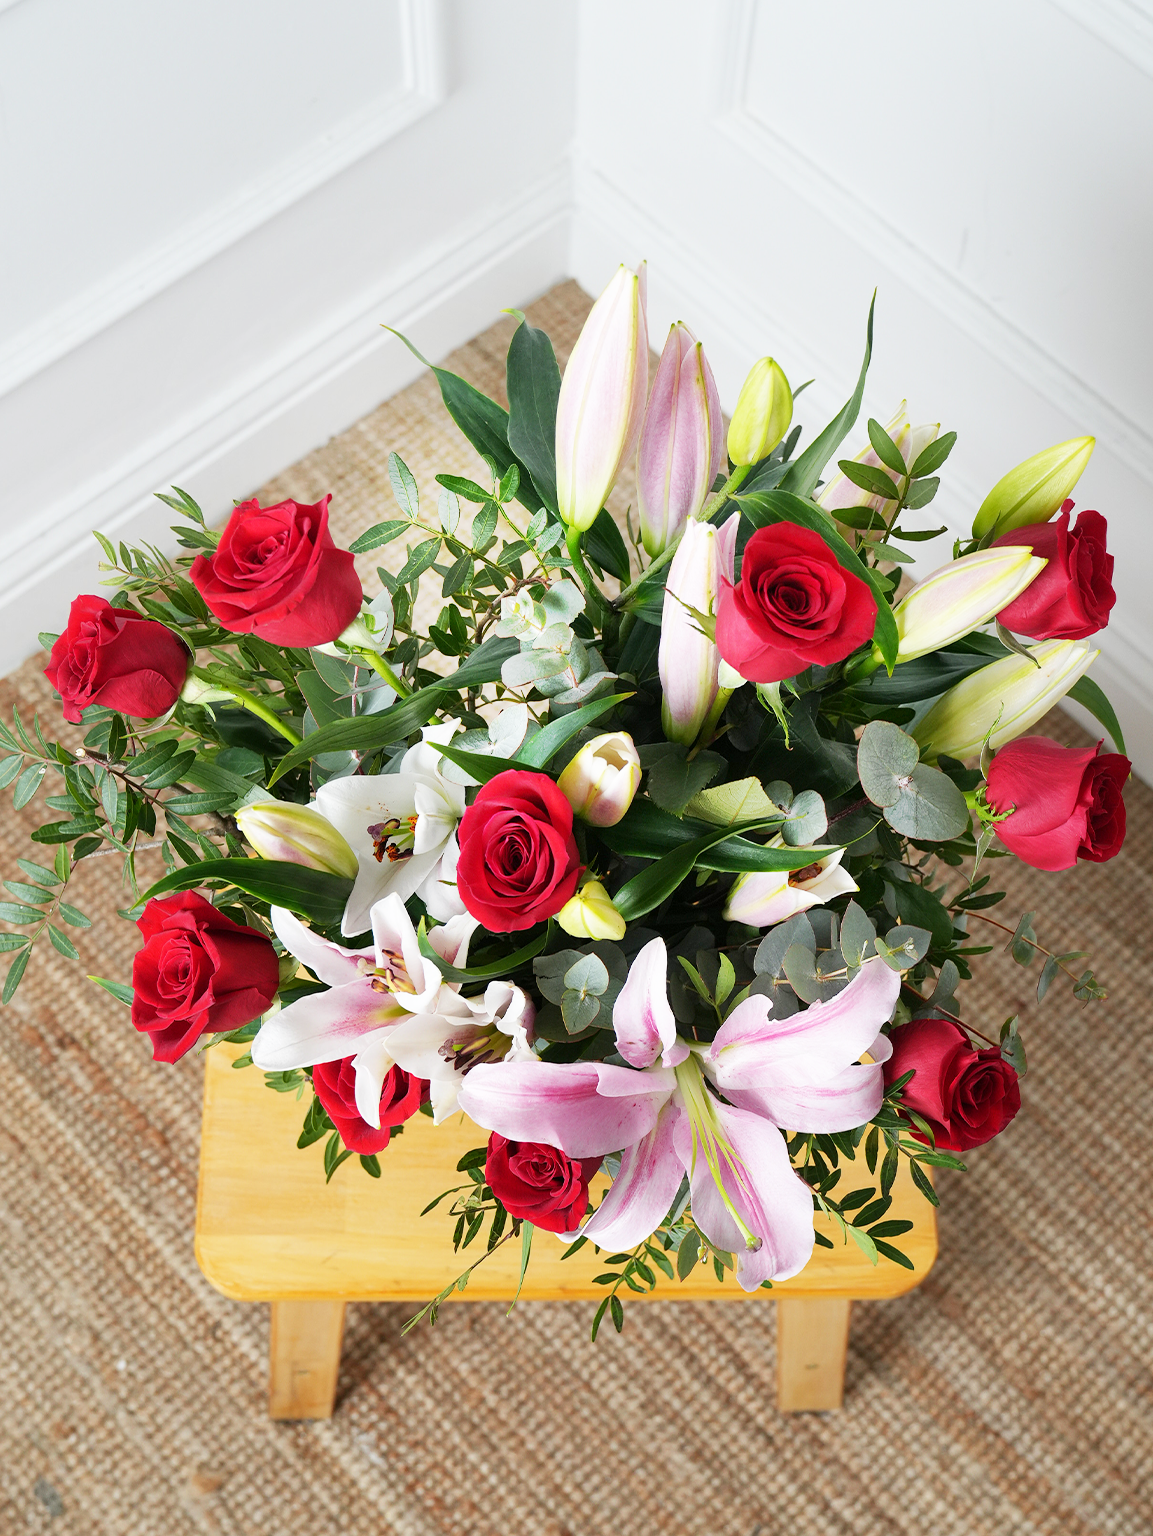 Red Roses and Pink Lily - Vase with Free Upgrade to Next Size